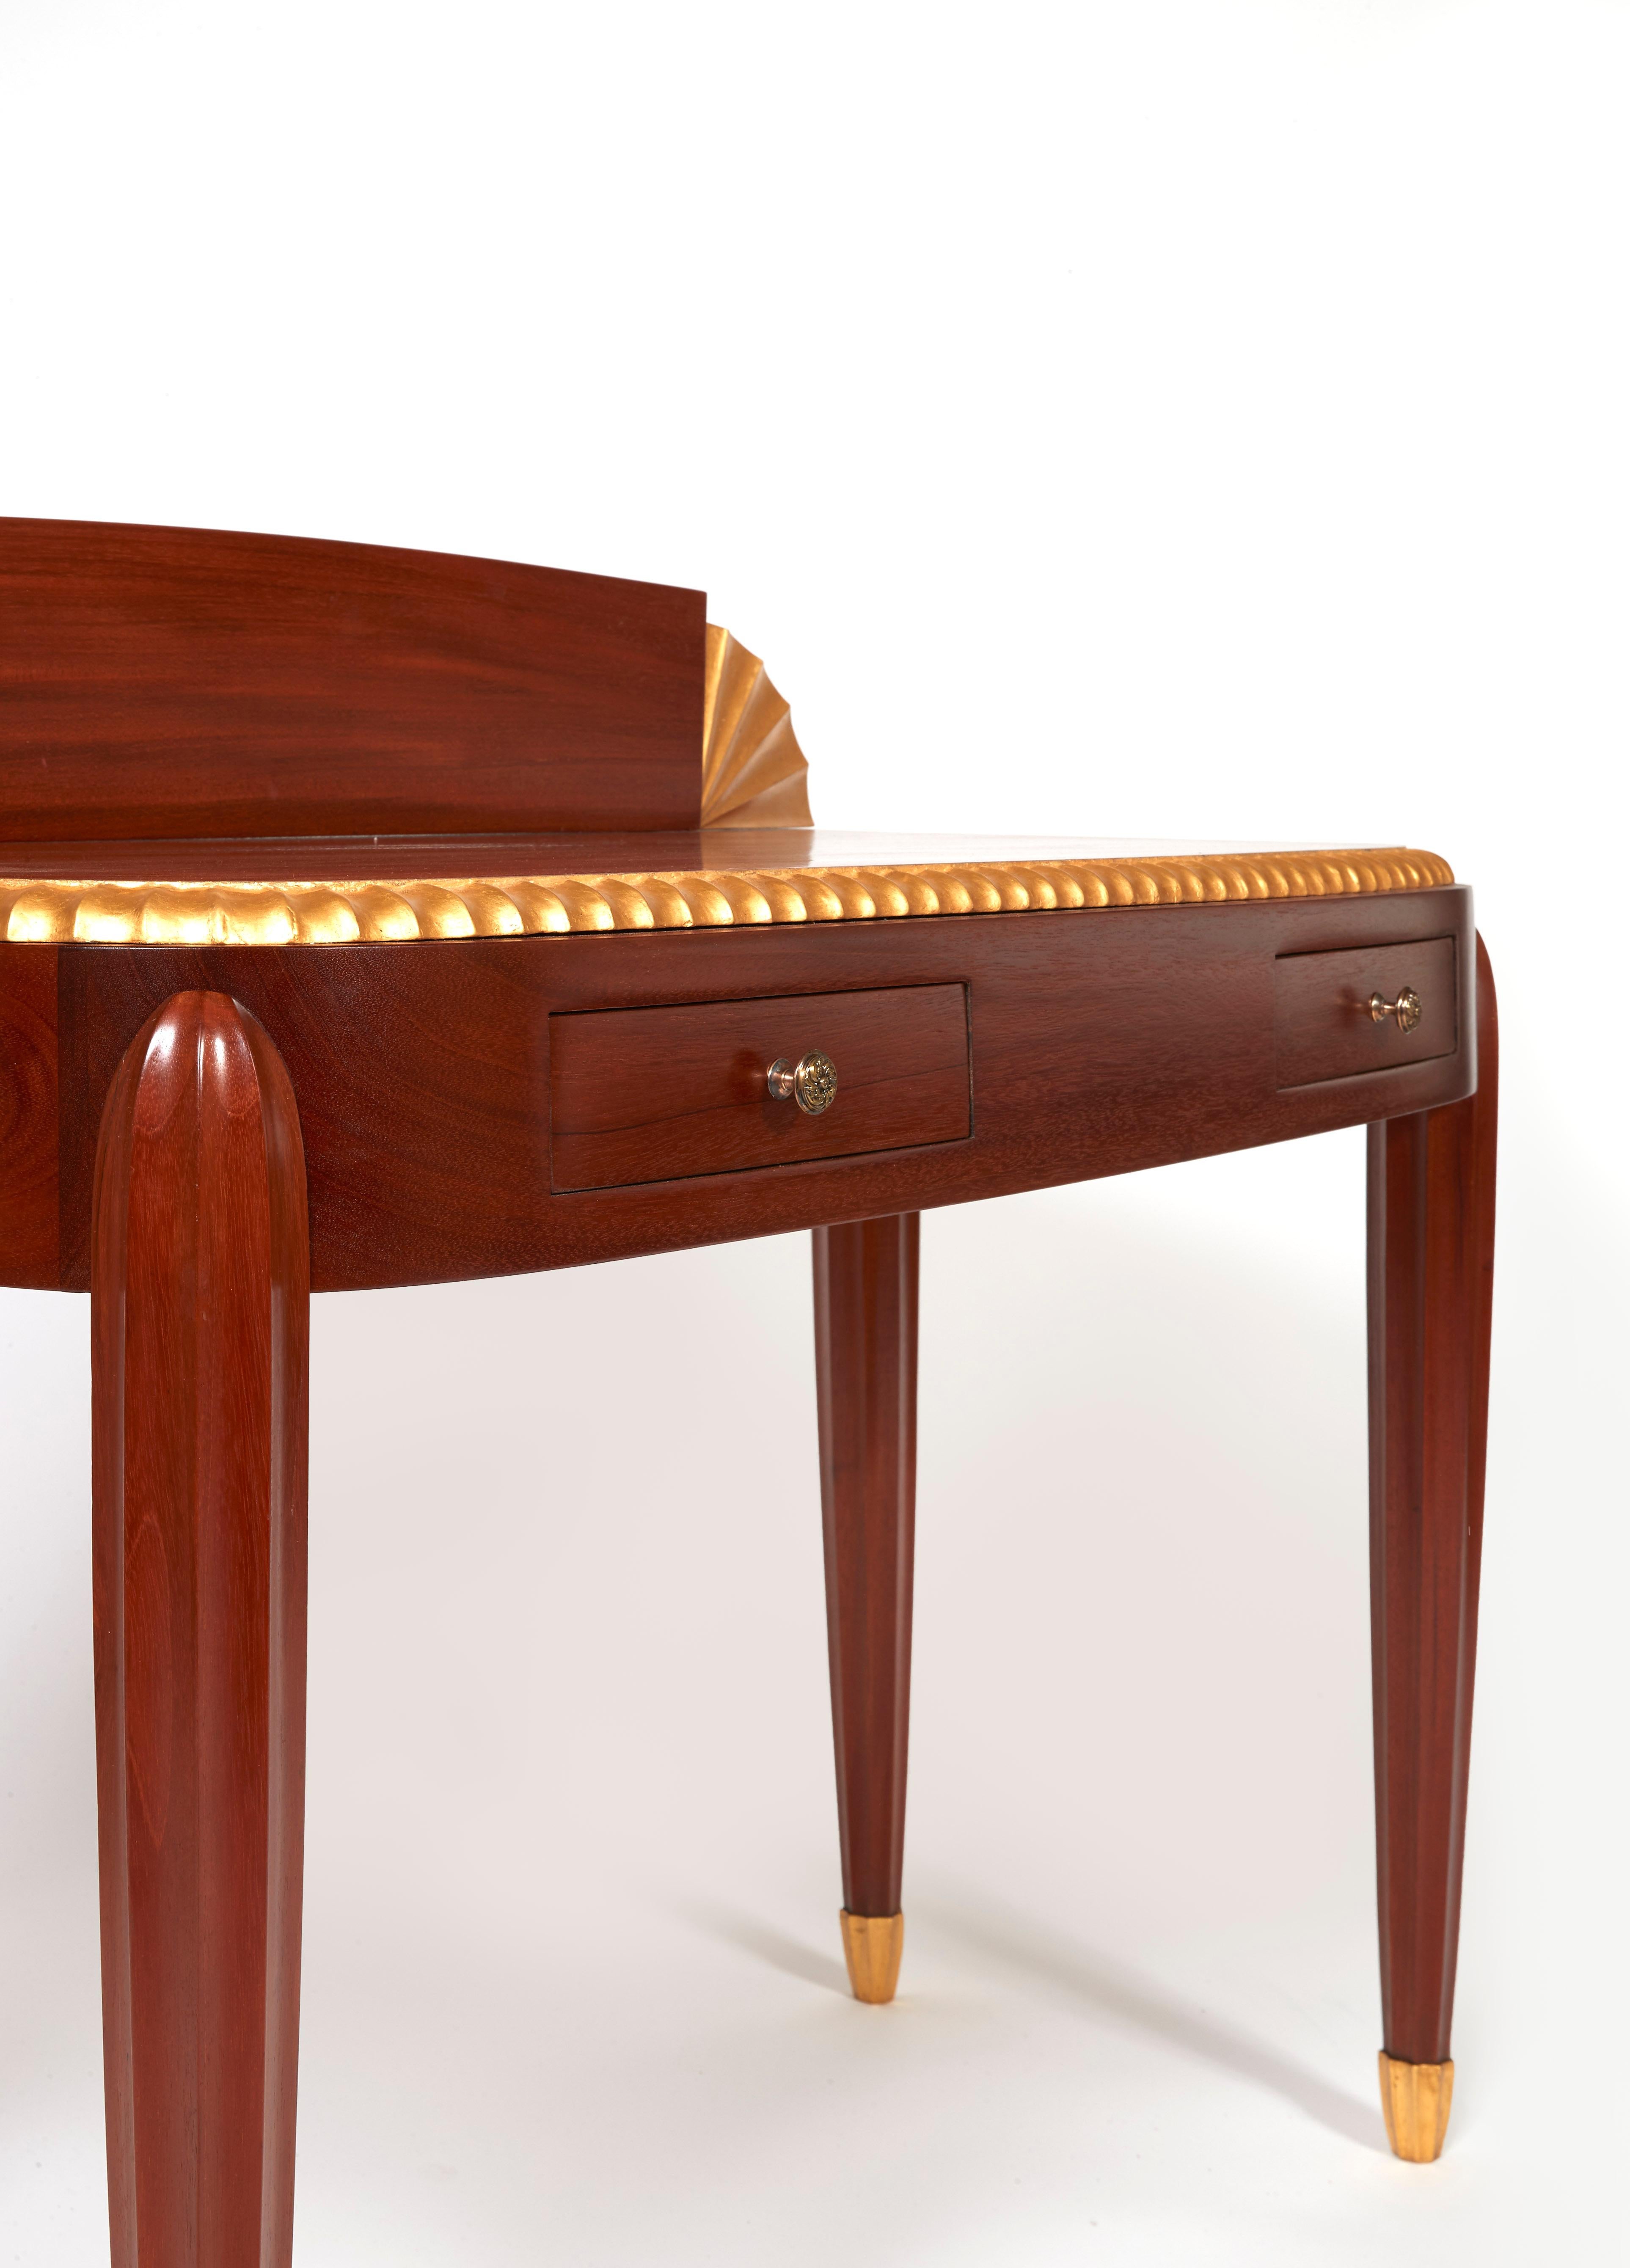 Jules Leleu, Lady's Writing Desk in Mahogany Wood and Golden Leaves, circa 1925 (Art déco)